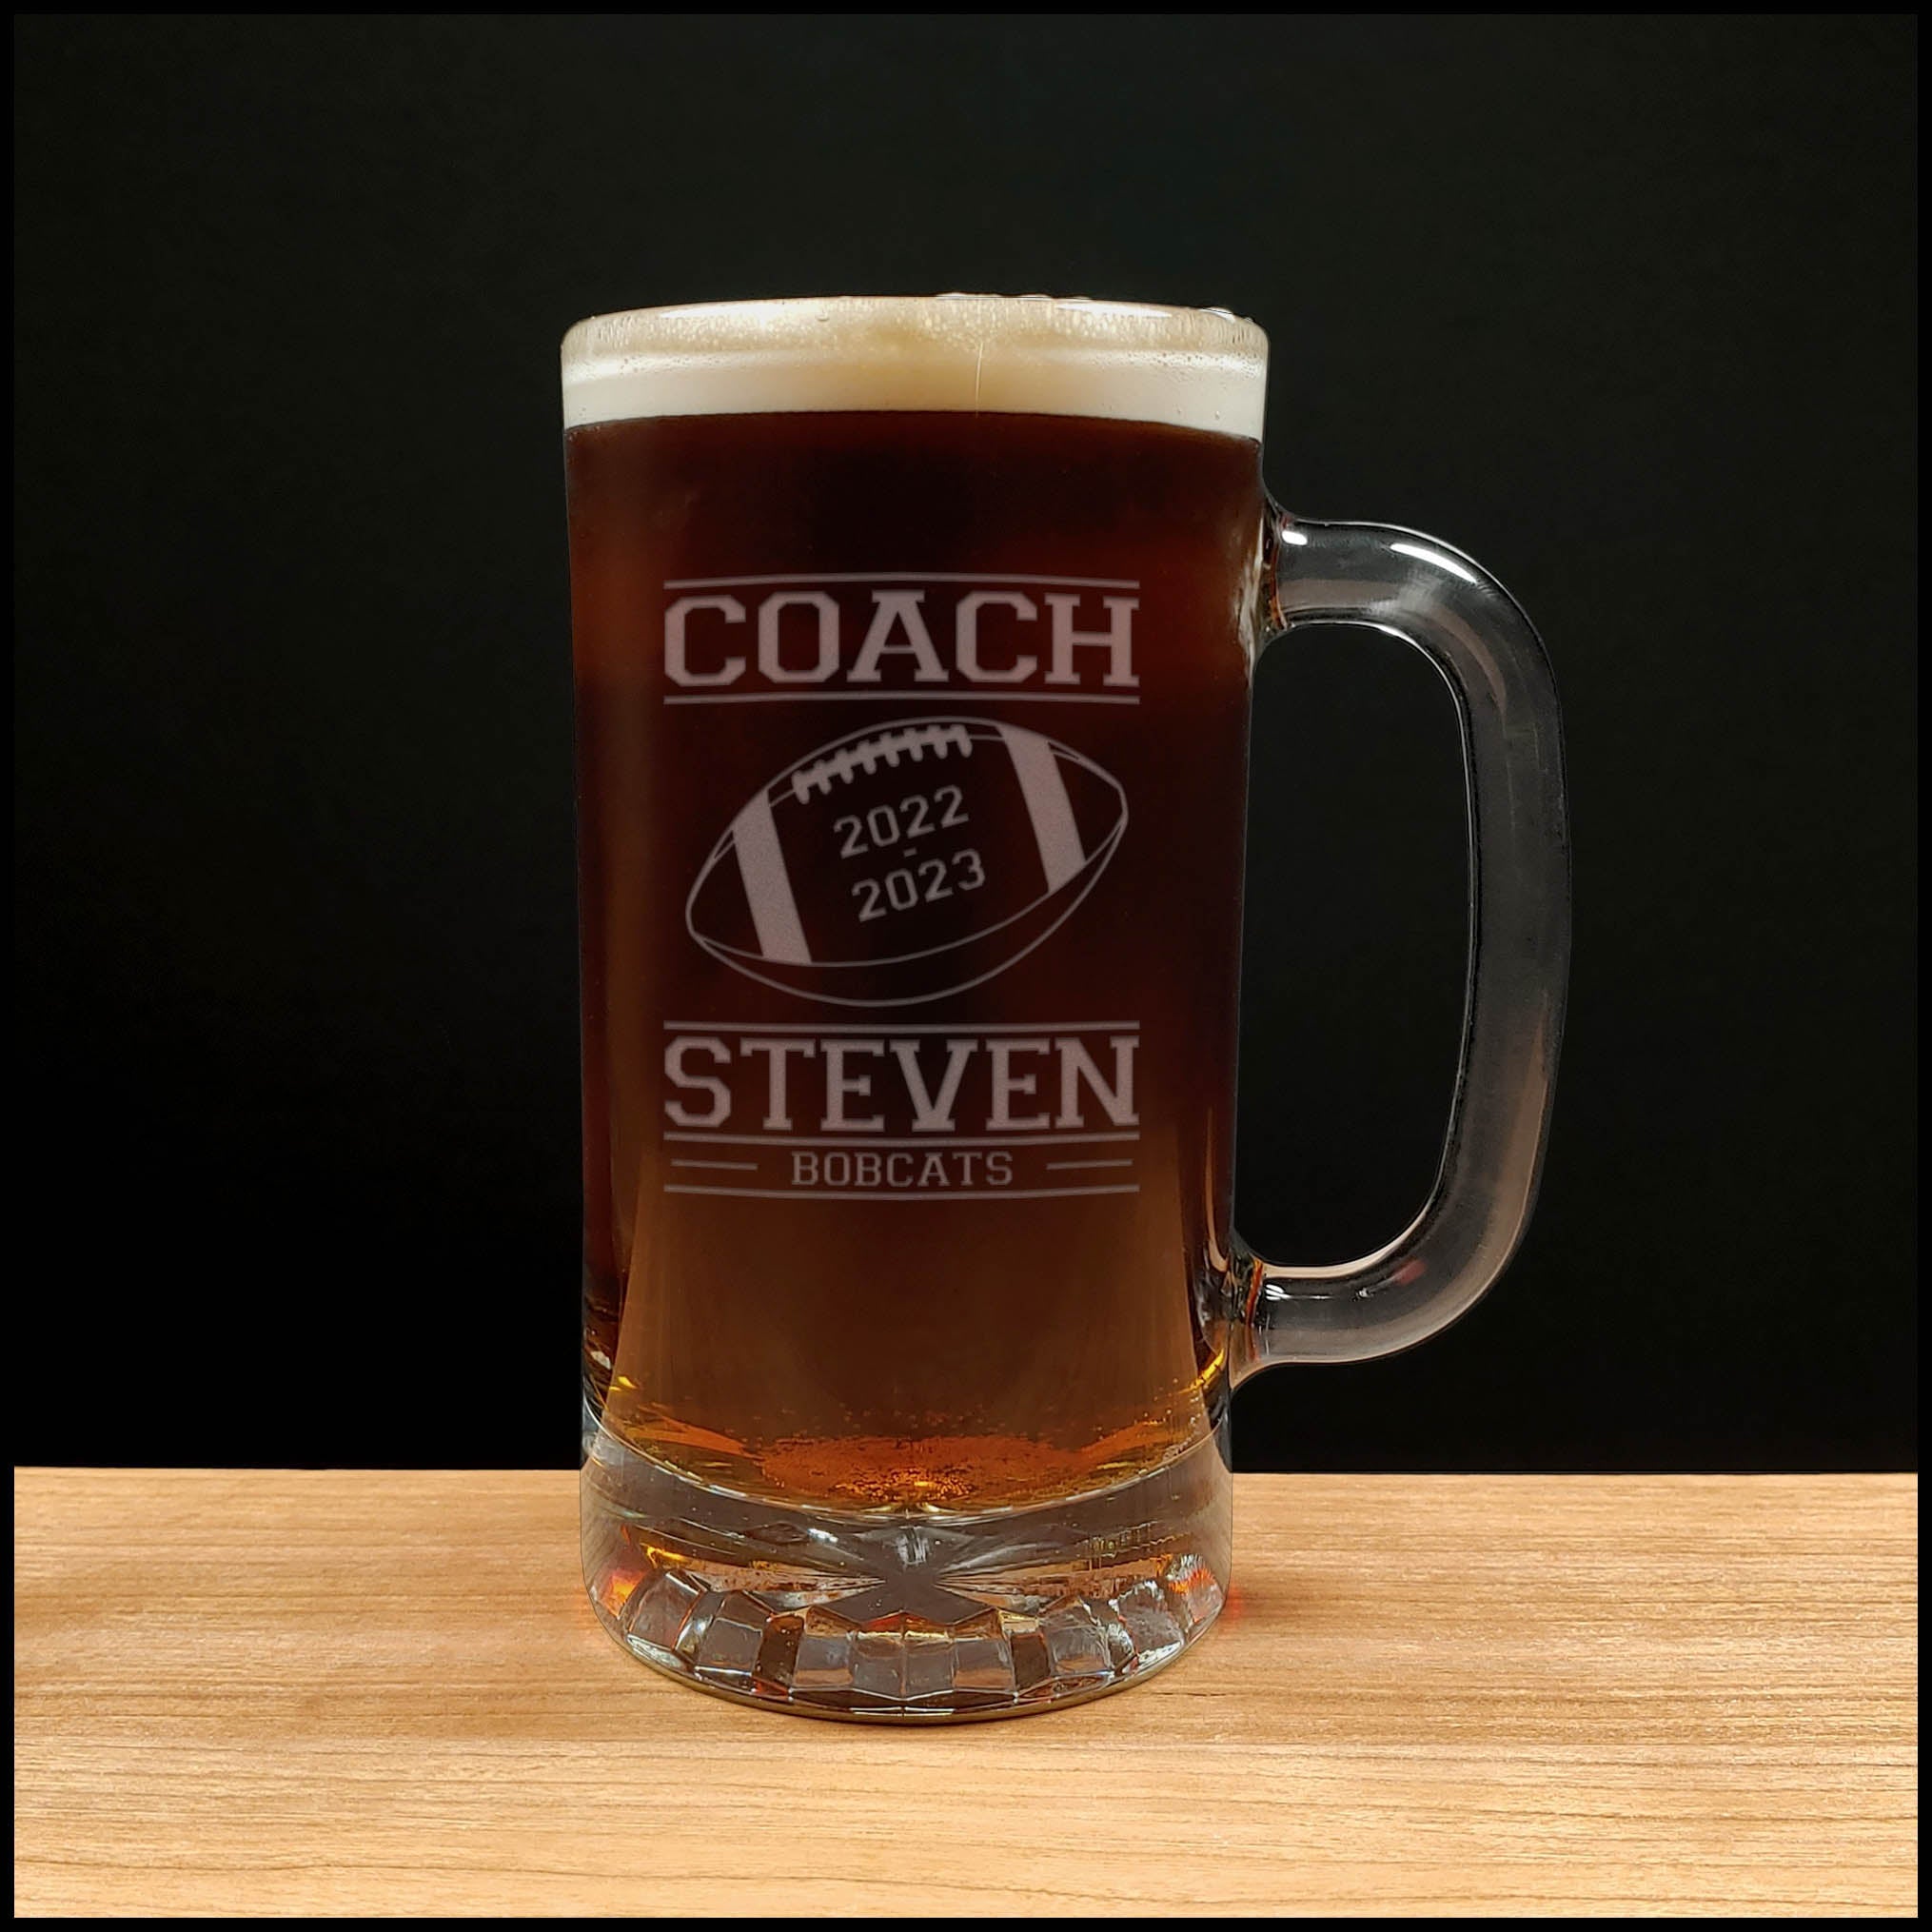 Football Coach Beer Mug With Team Name and Years - Copyright Hues in Glass